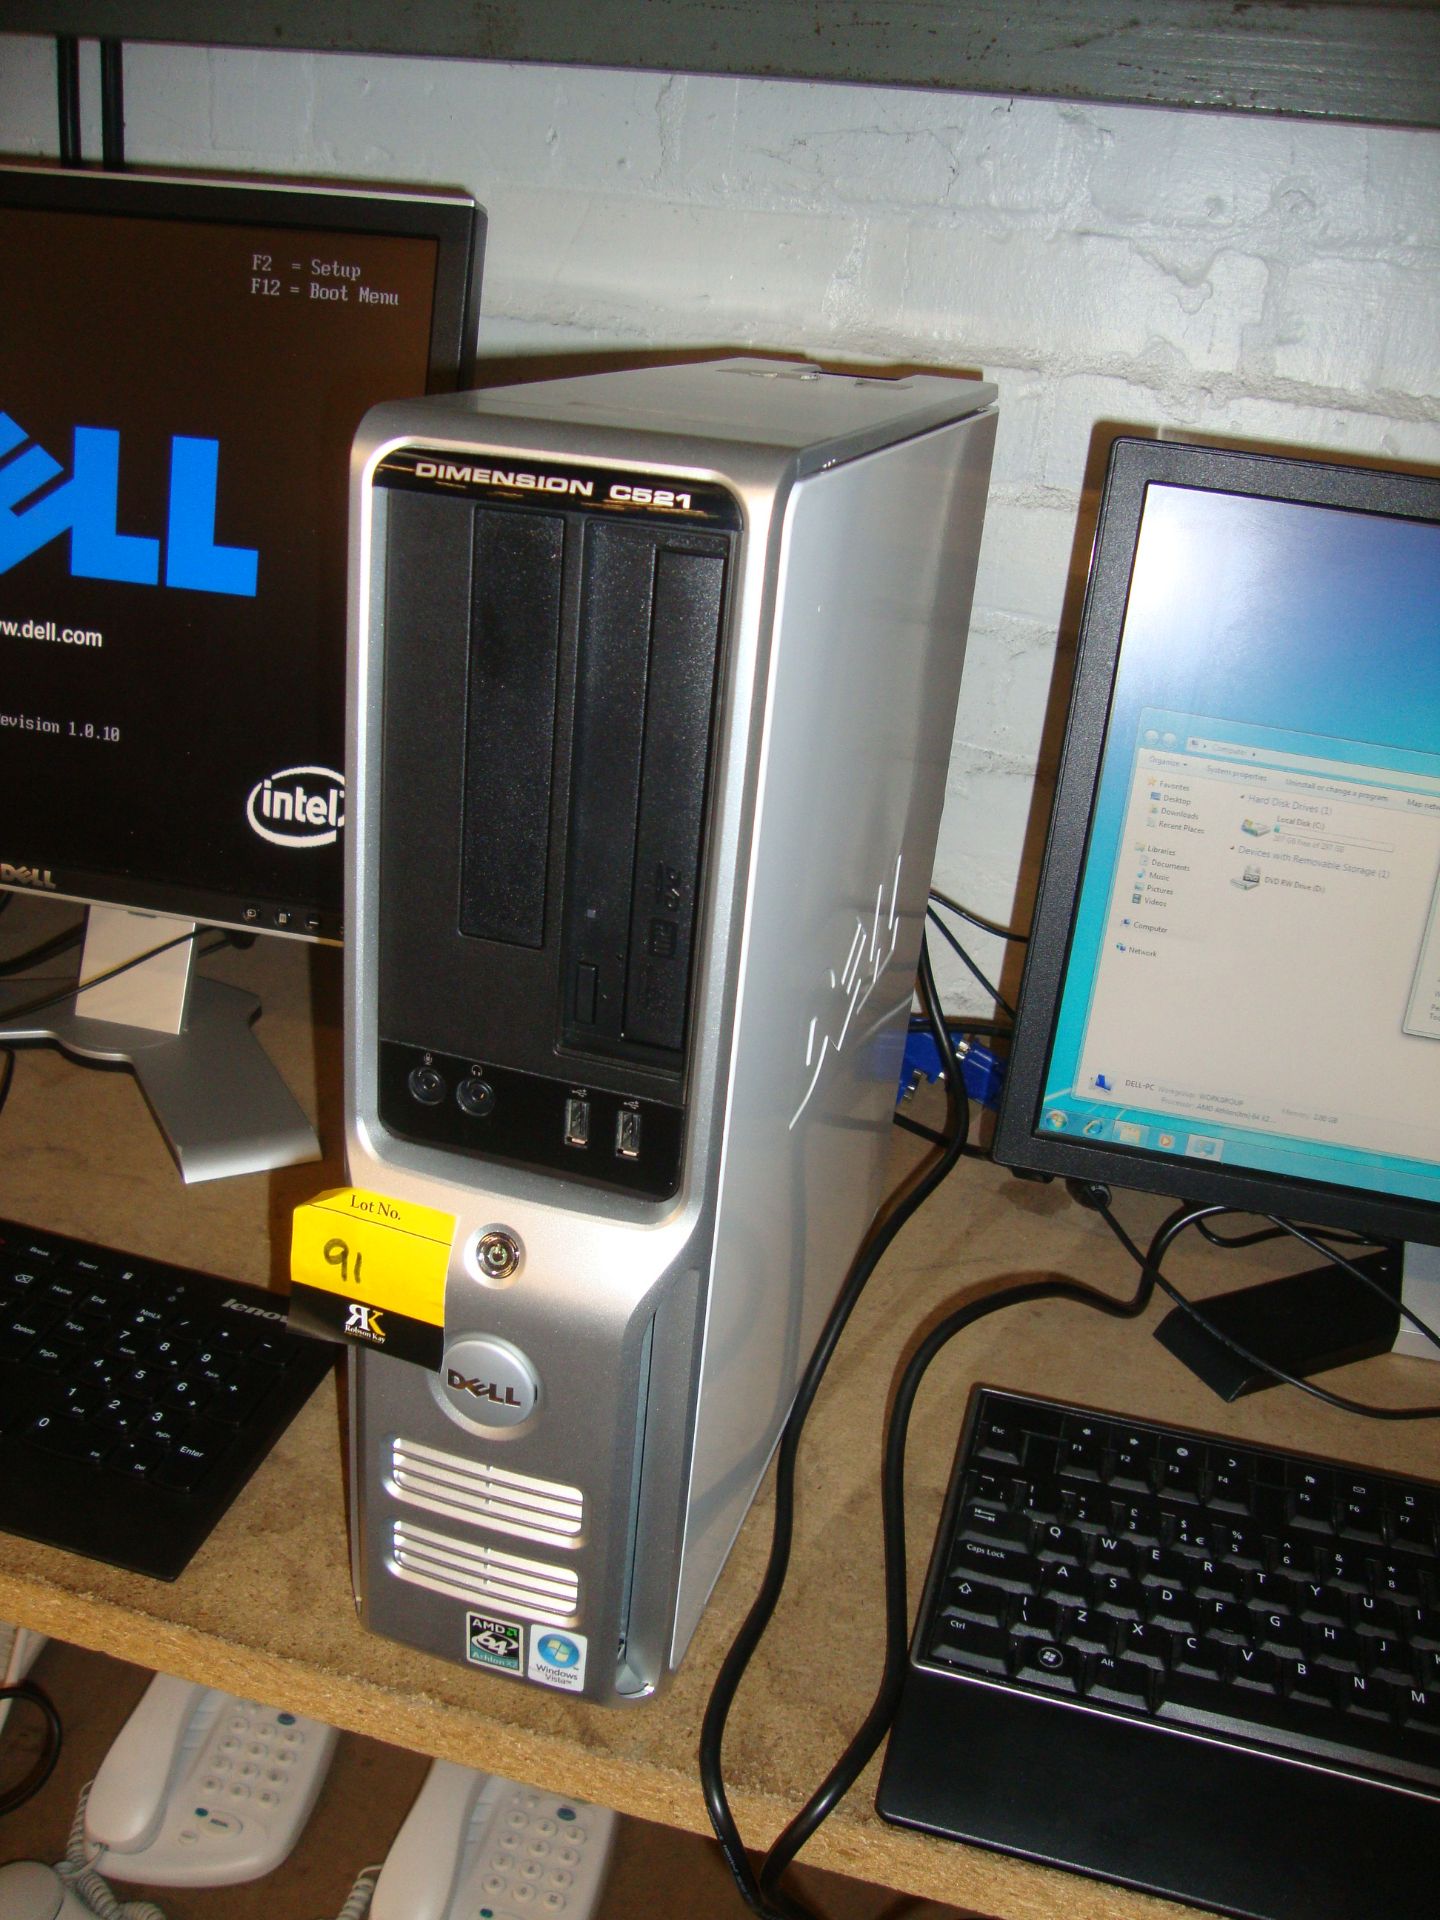 Dell Dimension C521 tower desktop computer including Dell widescreen LCD monitor plus keyboard - Image 2 of 5